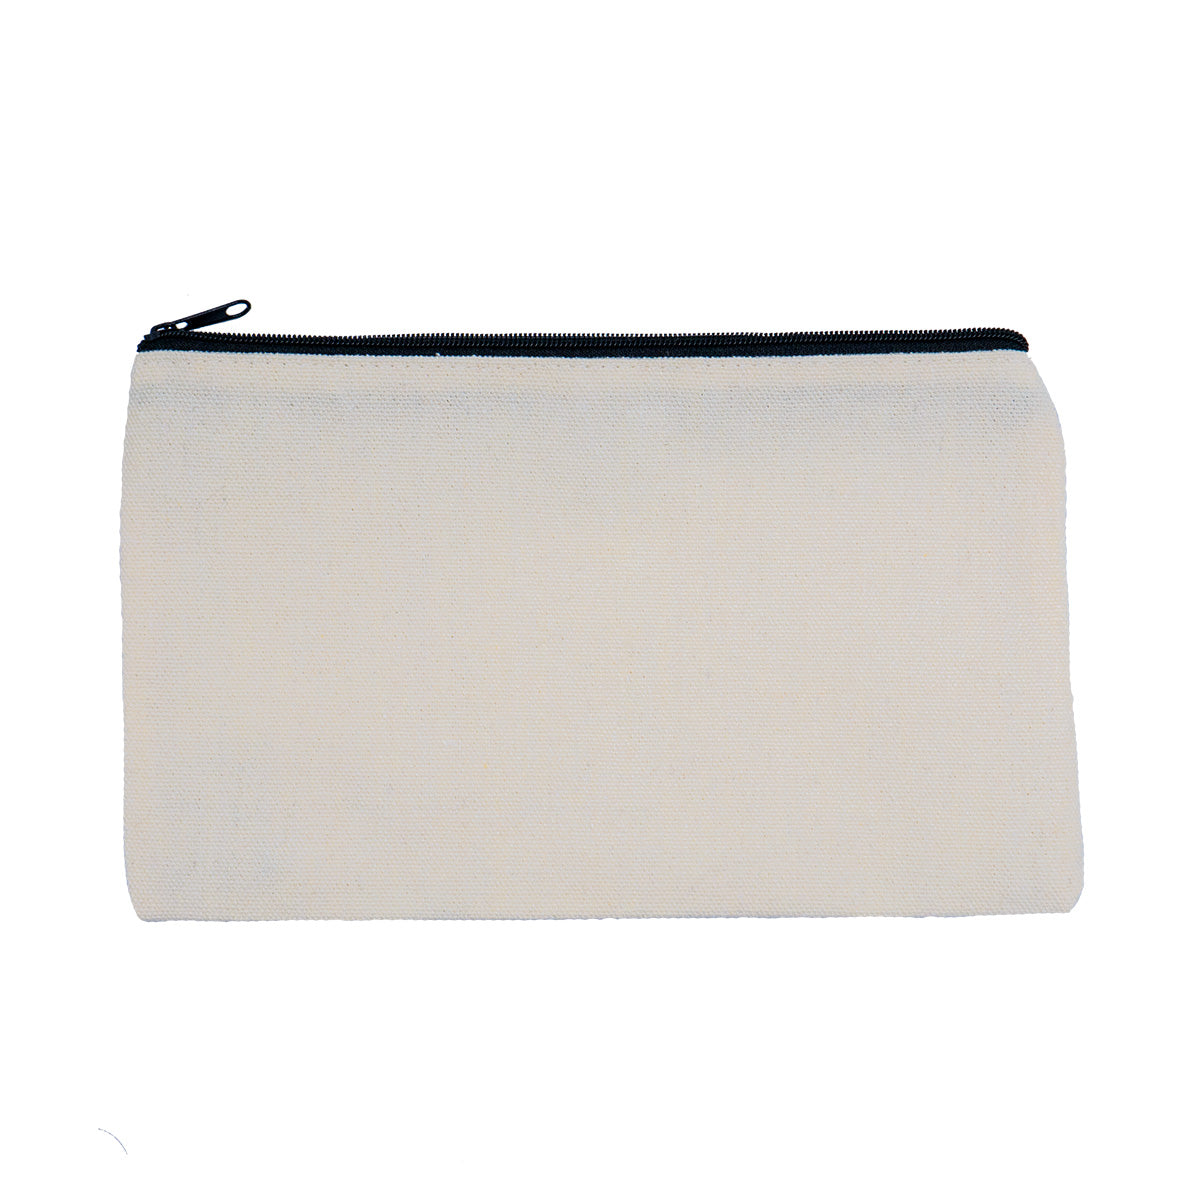 Rear view of the Canvas Pouch. There is no text. It is a solid cream background with black zipper on top.